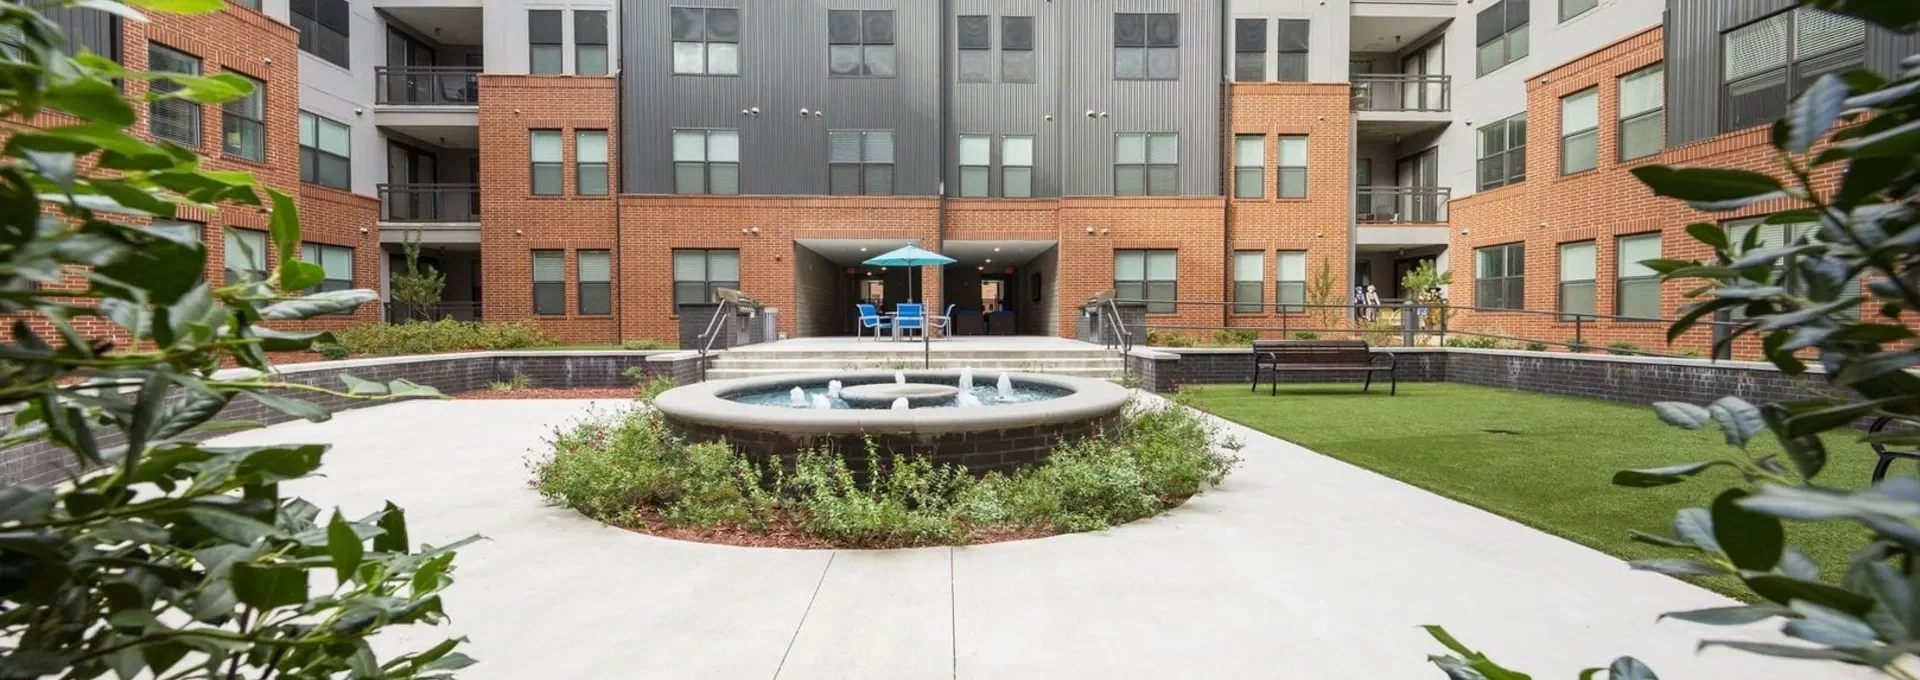 the courtyard at The Steelyard Apartments